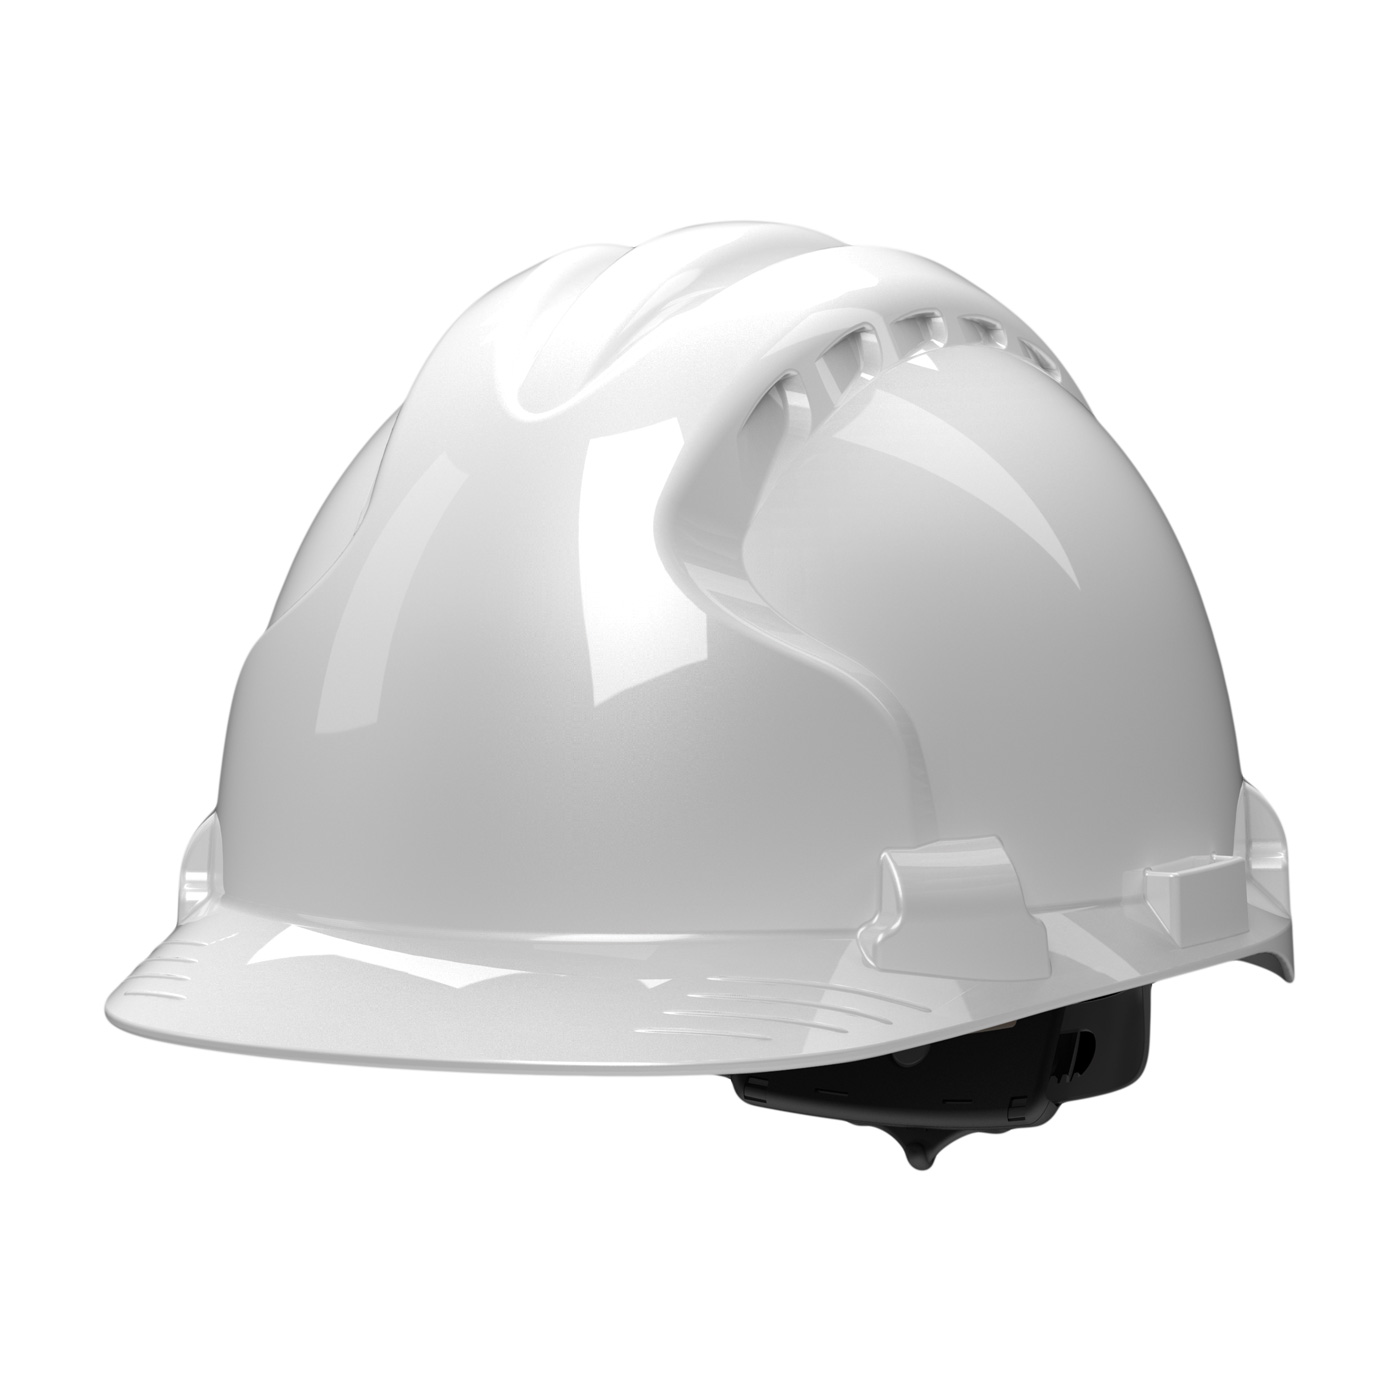 TYPE II HARD HAT WITH HDPE SHELL, EPS IMPACT LINER, POLYESTER SUSPENSION AND WHEEL RATCHET ADJUSTMENT